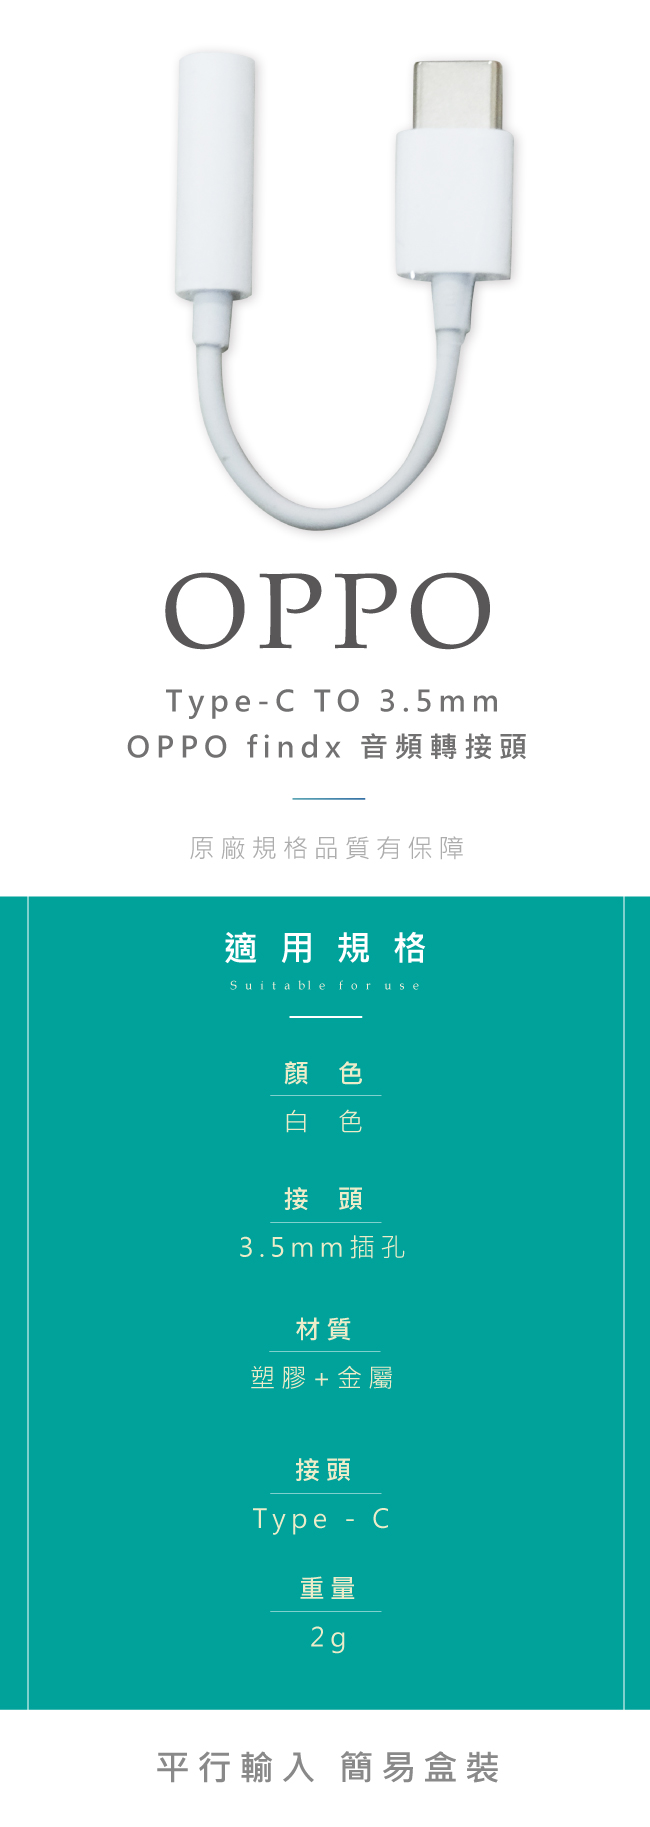 OPPO R17 TYPE-C TO 3.5mm findx 音頻轉接頭